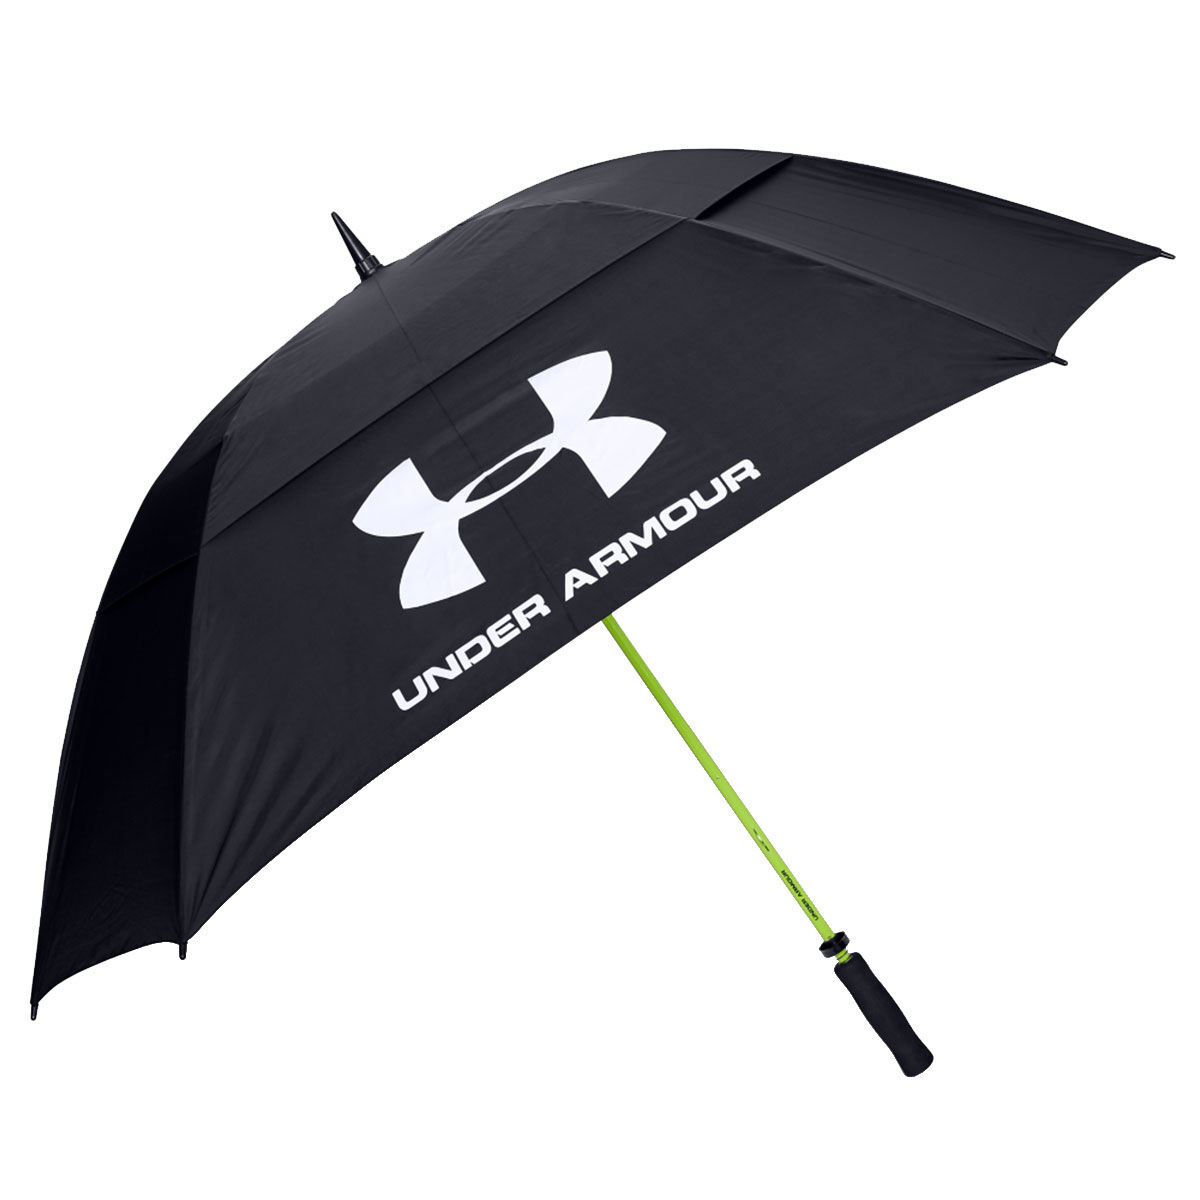 Under Armour Double Canopy Golf Umbrella, Mens, Black/yellow/white, 68 inches | American Golf